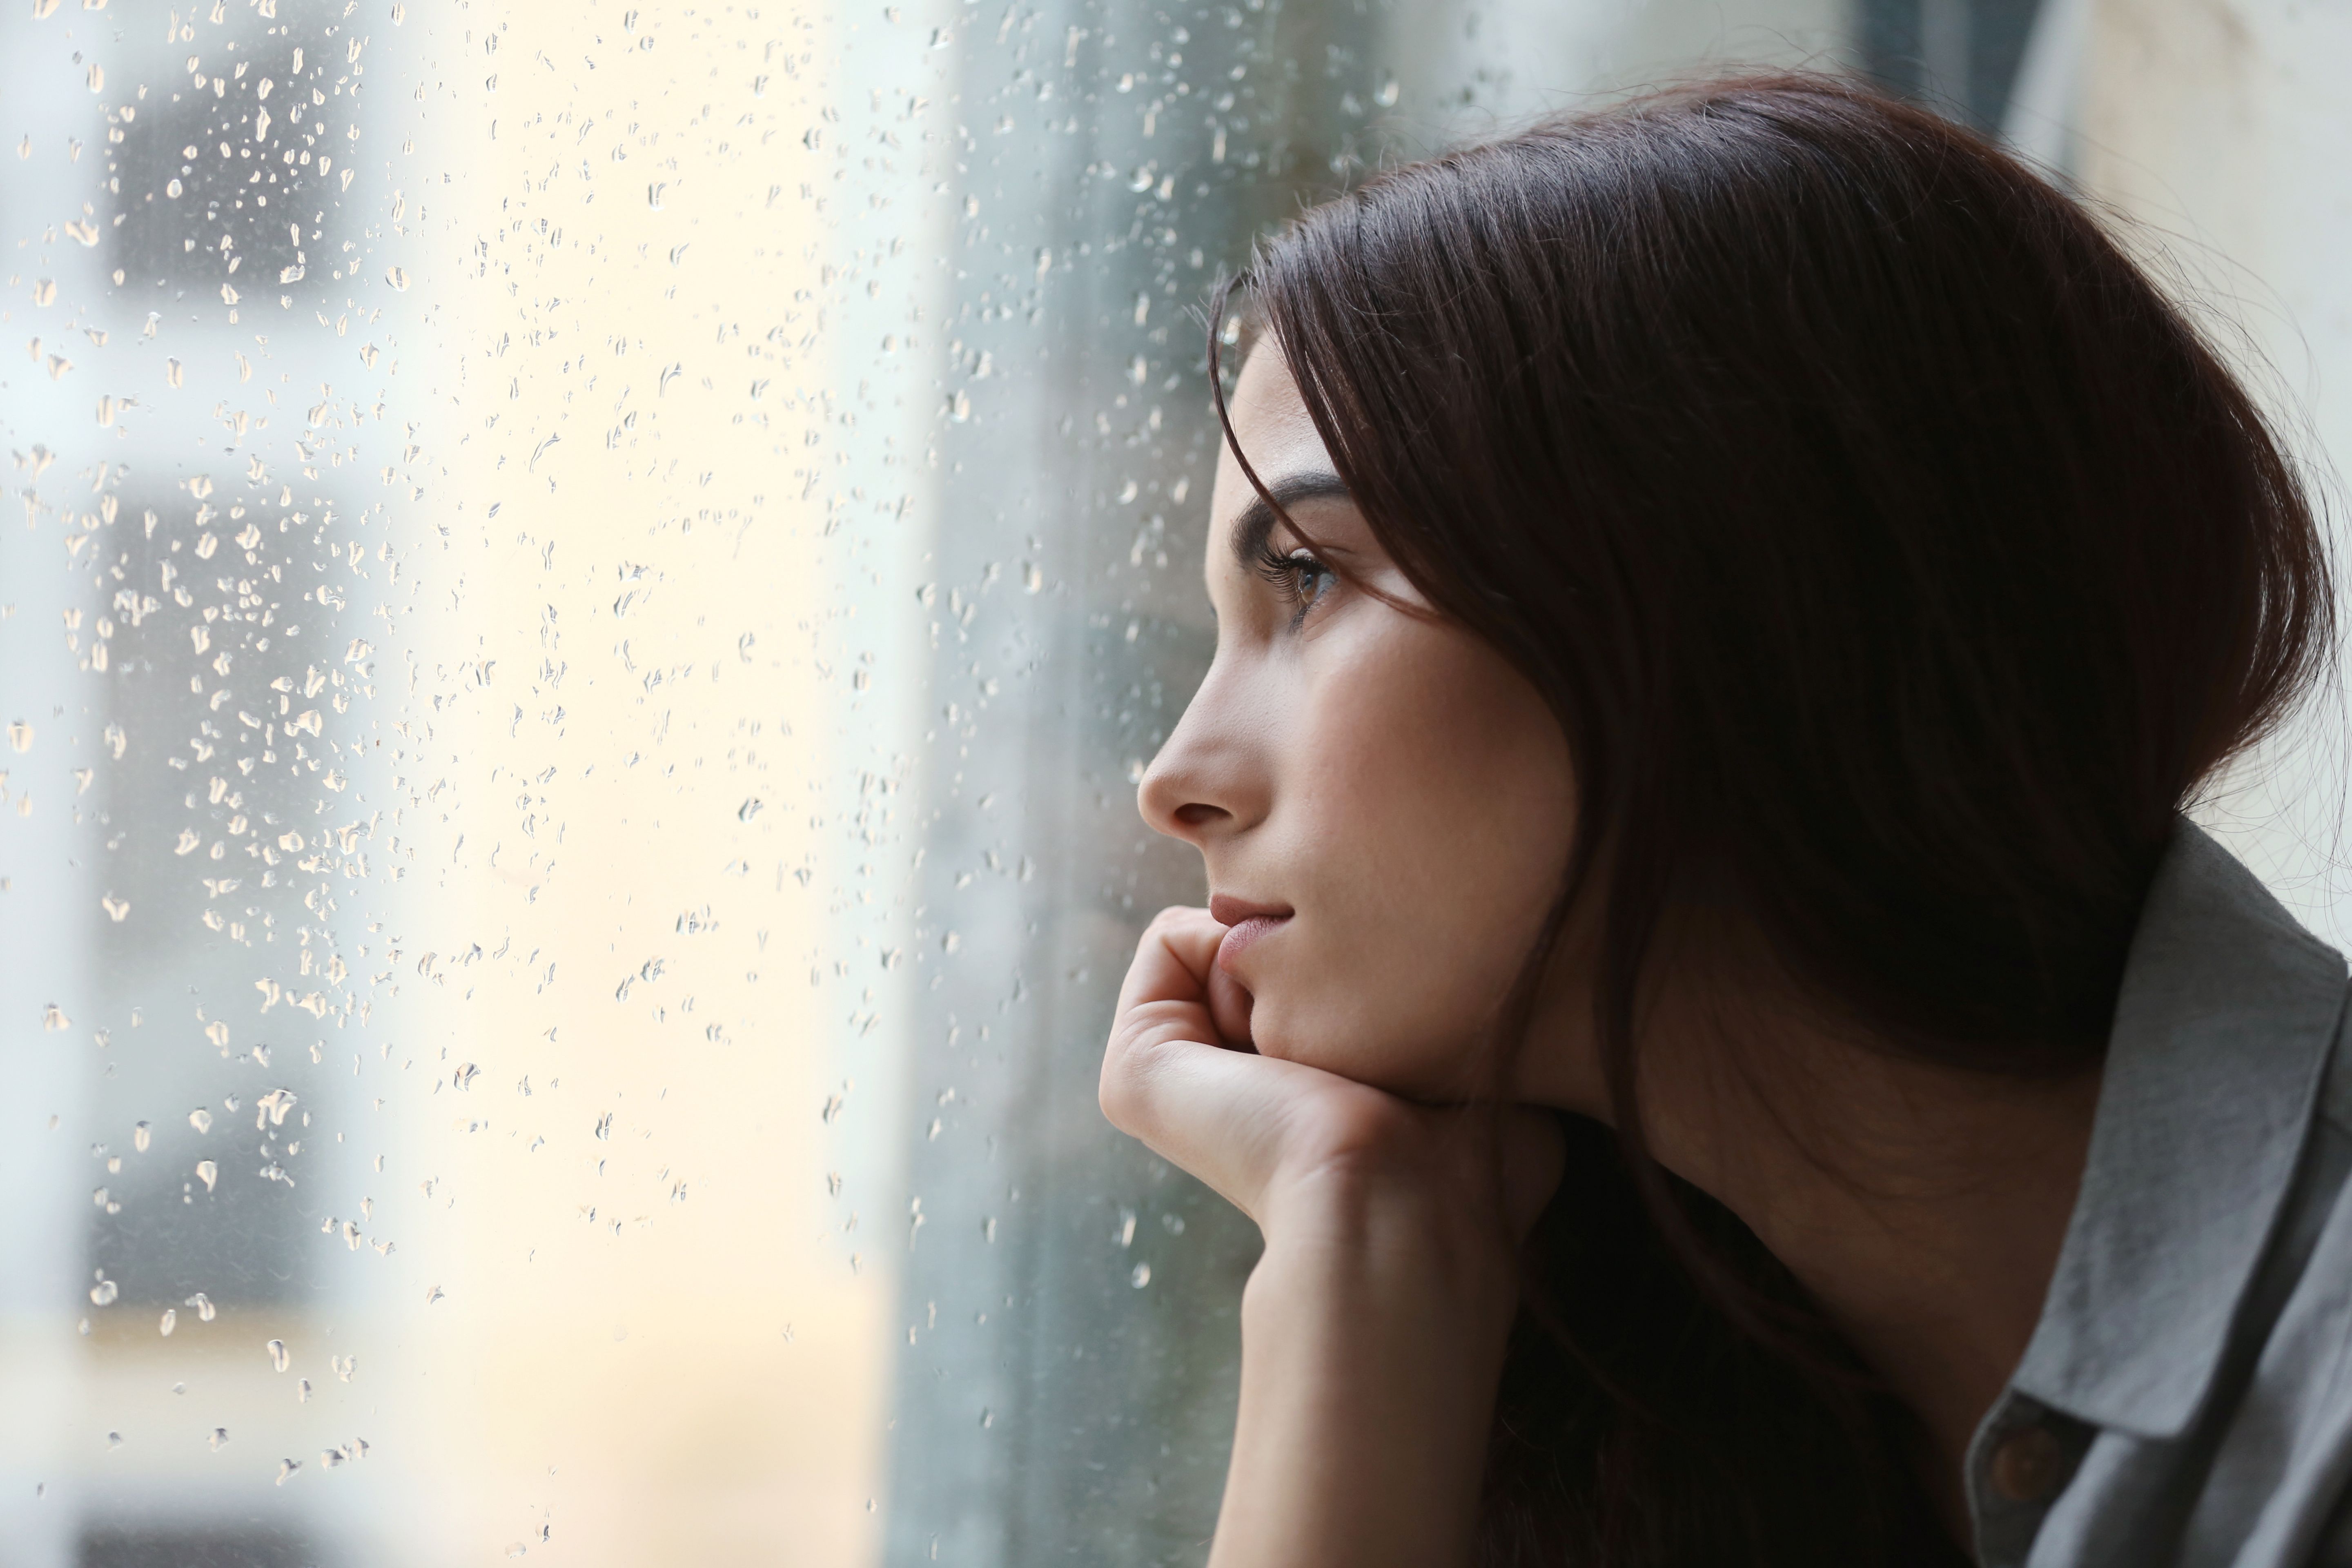 A sad woman looking out the window | Source: Shutterstock